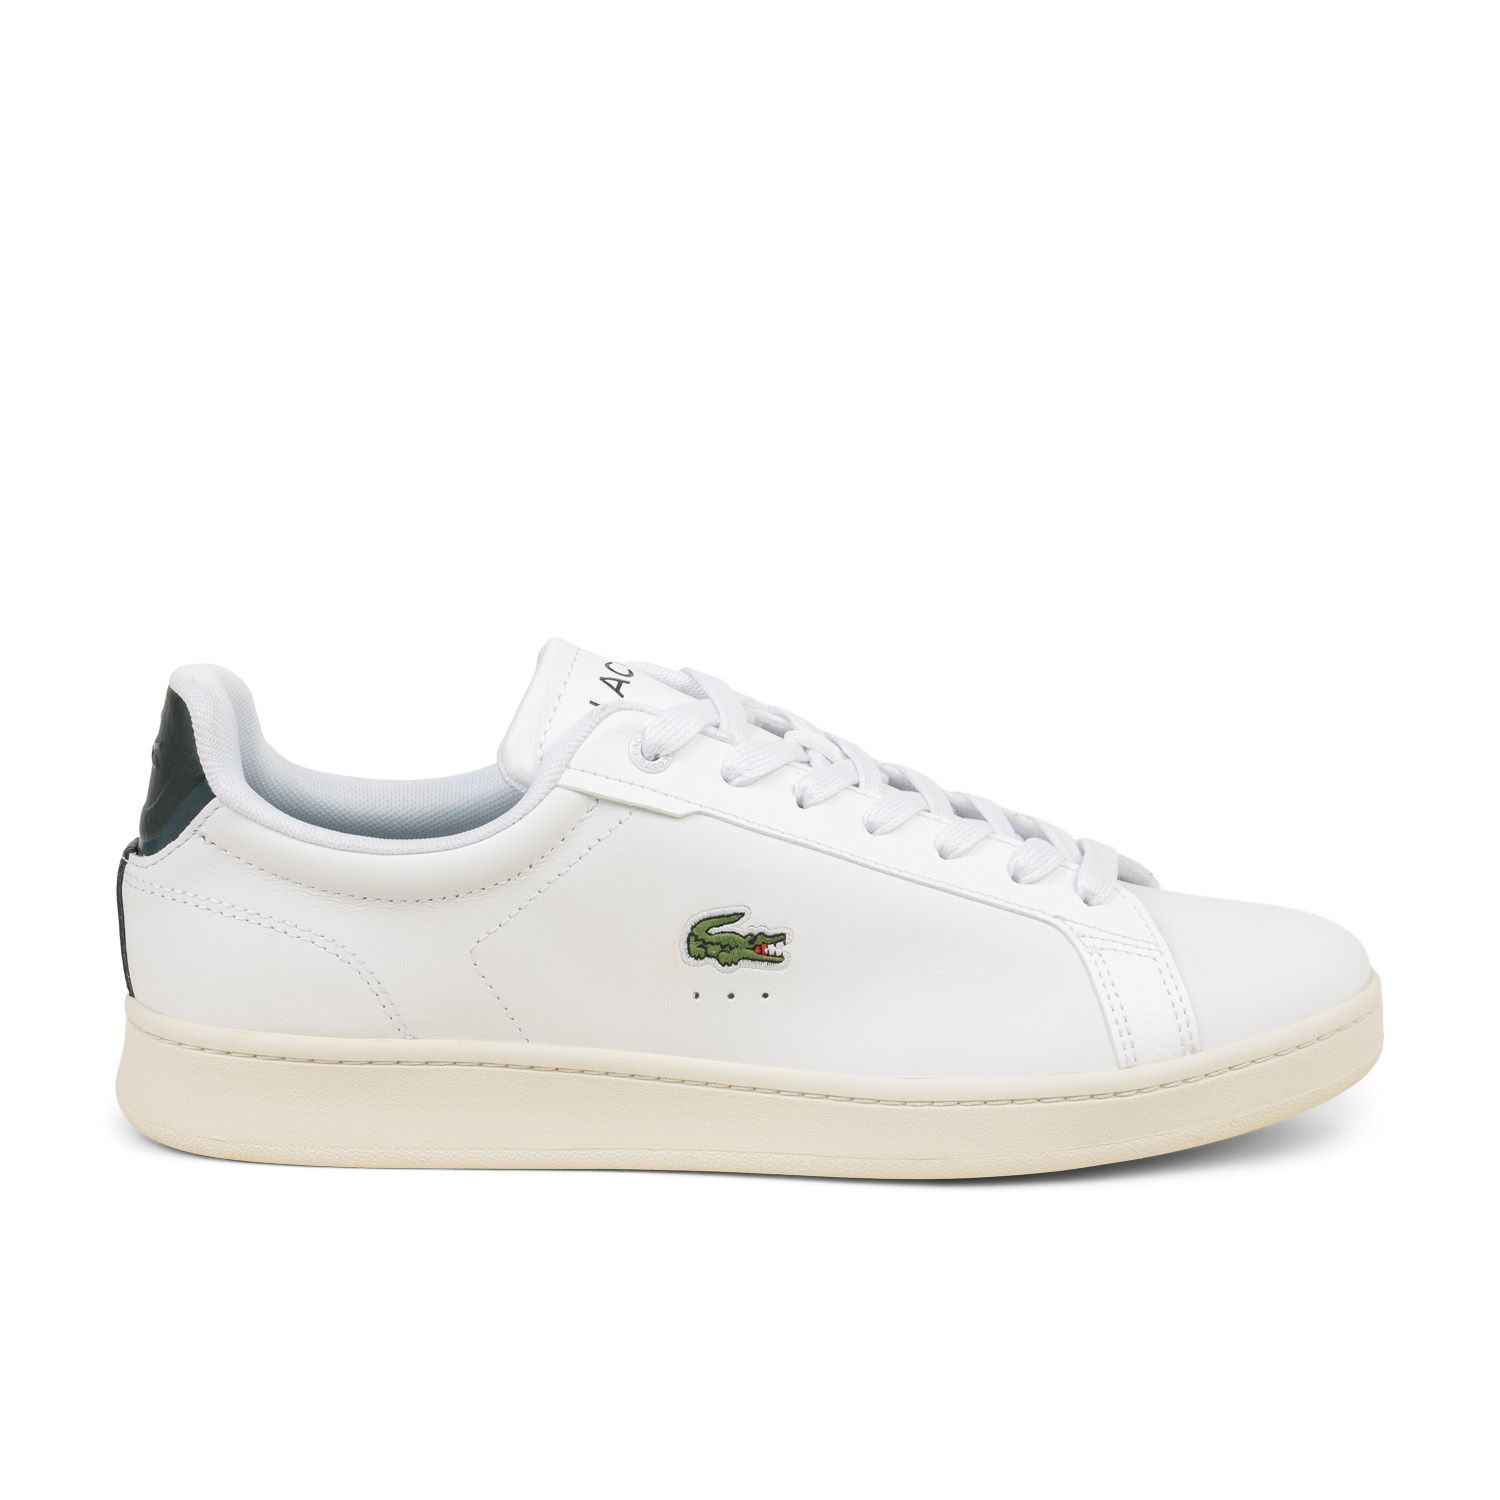 01 - CARNABY - LACOSTE -  - Cuir